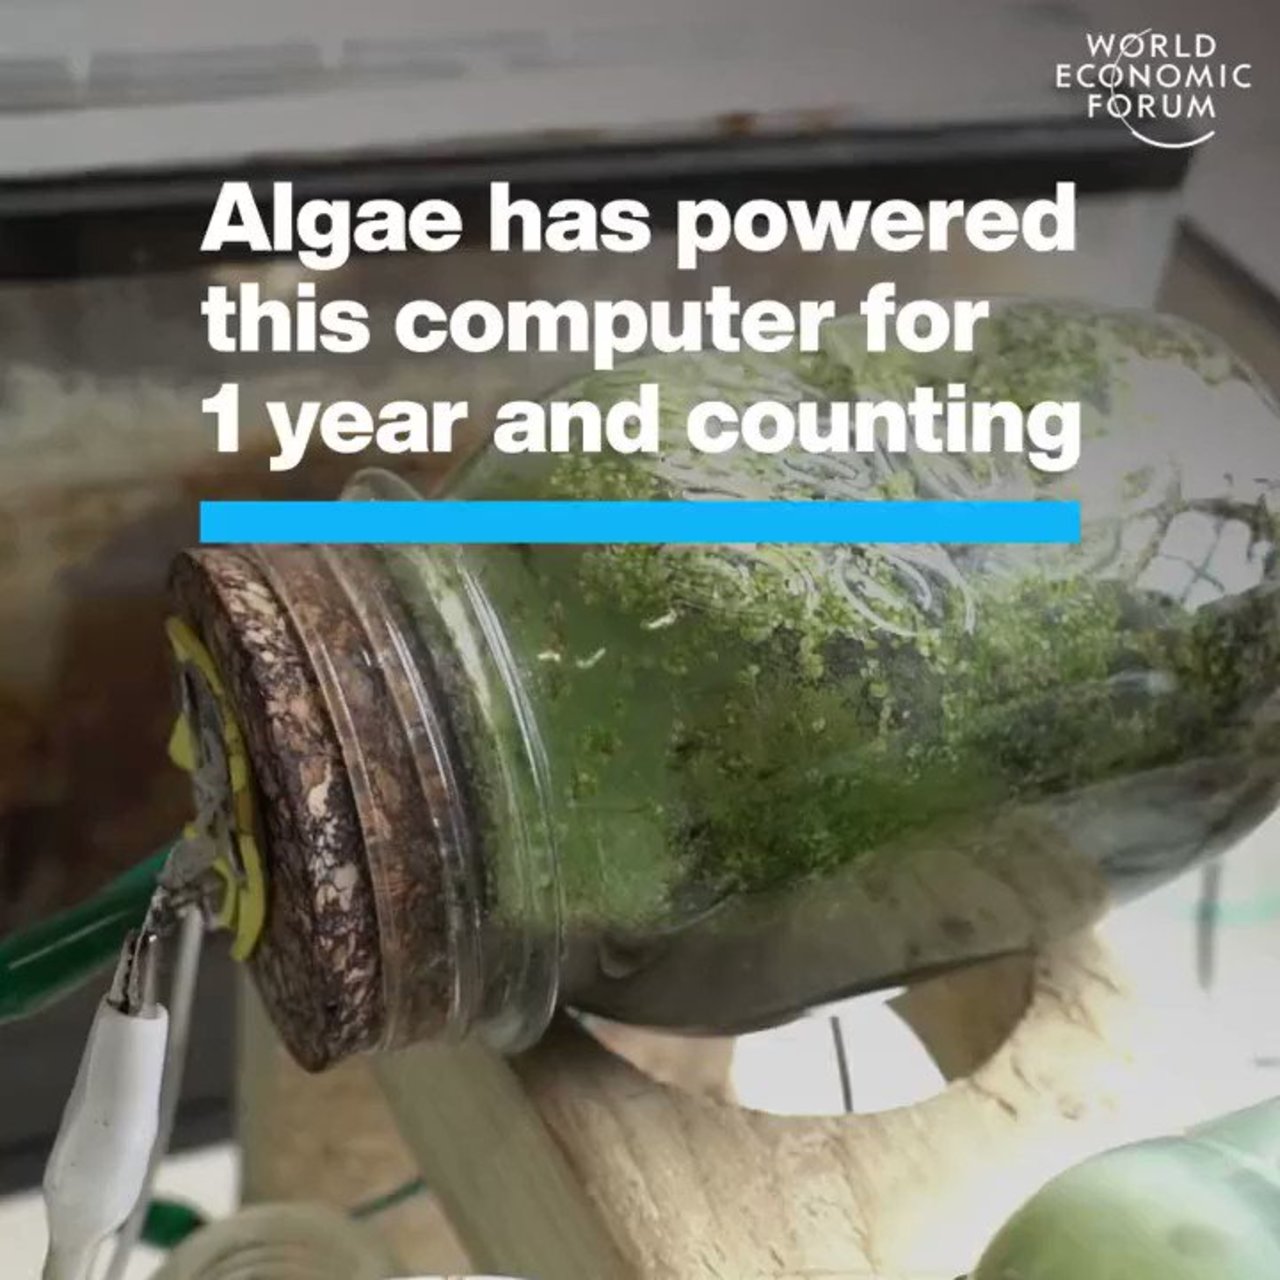 Algae has powered this computer for 1 year and counting by @wef #AI #ArtificialIntelligence #Innovation #Sustainability #Renewables #CleanEnergy #Tech #Technology cc: @maxjcm @ronald_vanloon @pascal_bornet @marcusborba https://t.co/ppxETjqgzZ